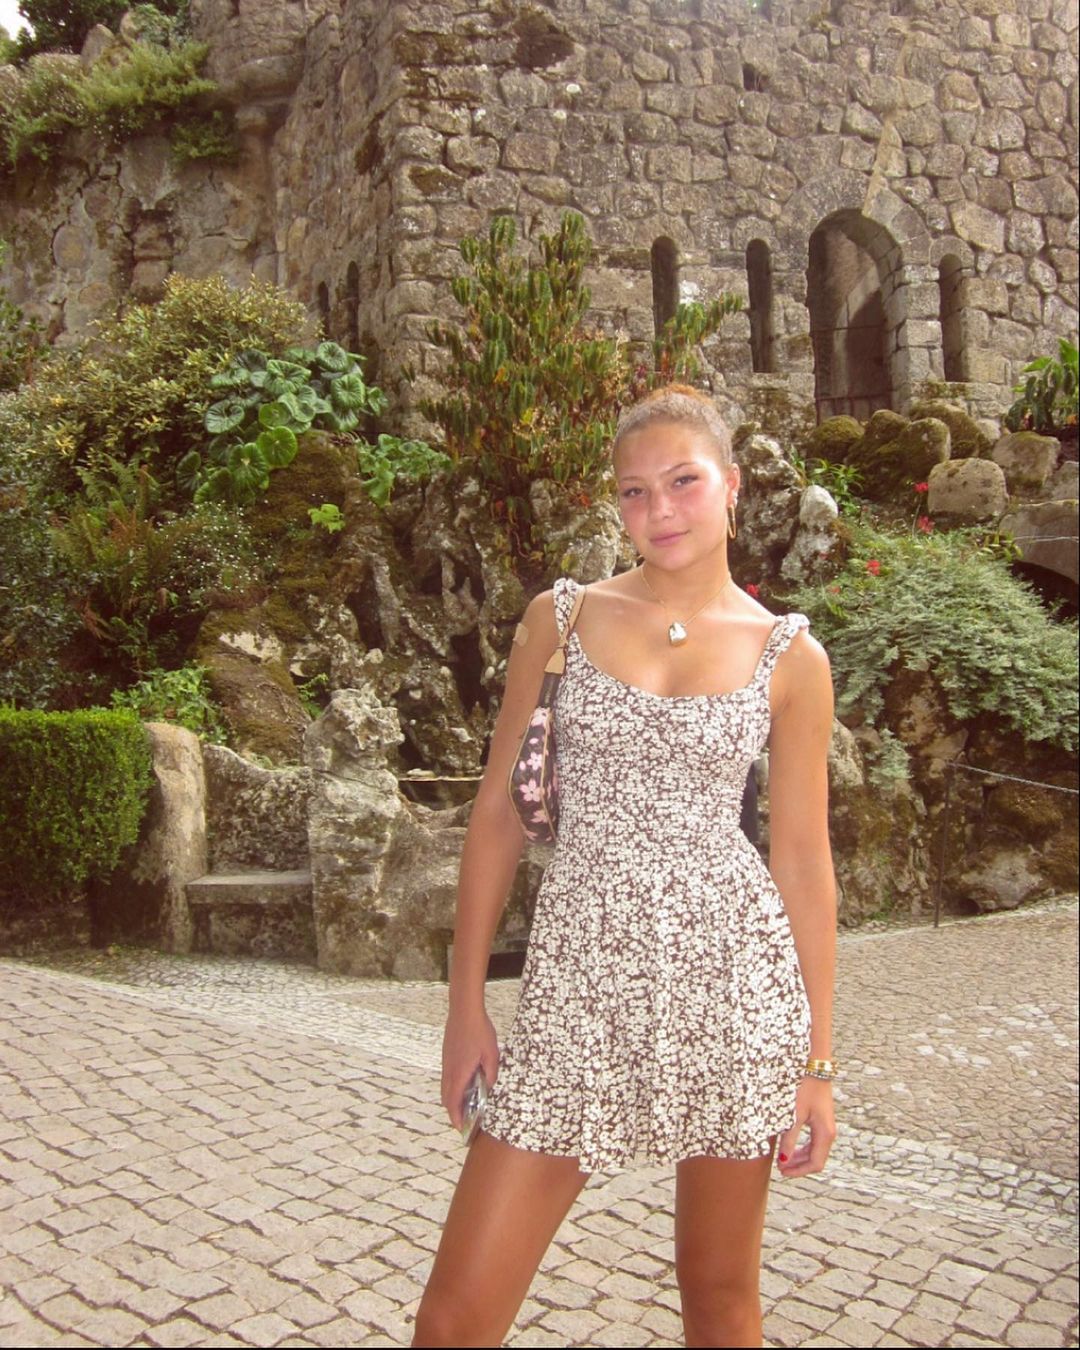 Isabella posed in front of the iconic sights in Sintra, Portugal while rocking her trendy attire and showing off her glowing skin